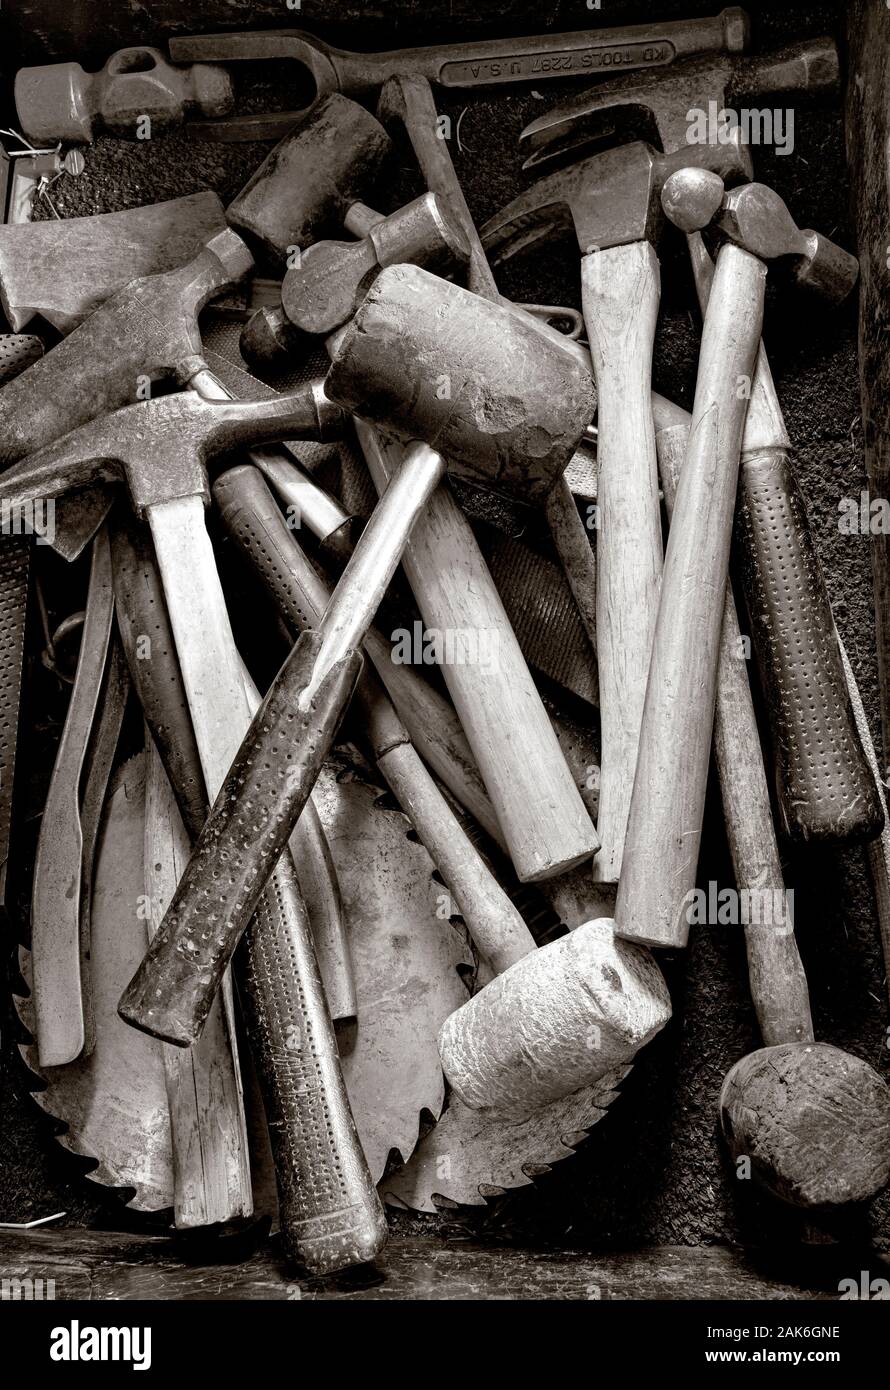 WY04128-00-BW...WYOMING - Tool cabnet full of hammers in the barn at the Willow Creek Ranch. Stock Photo